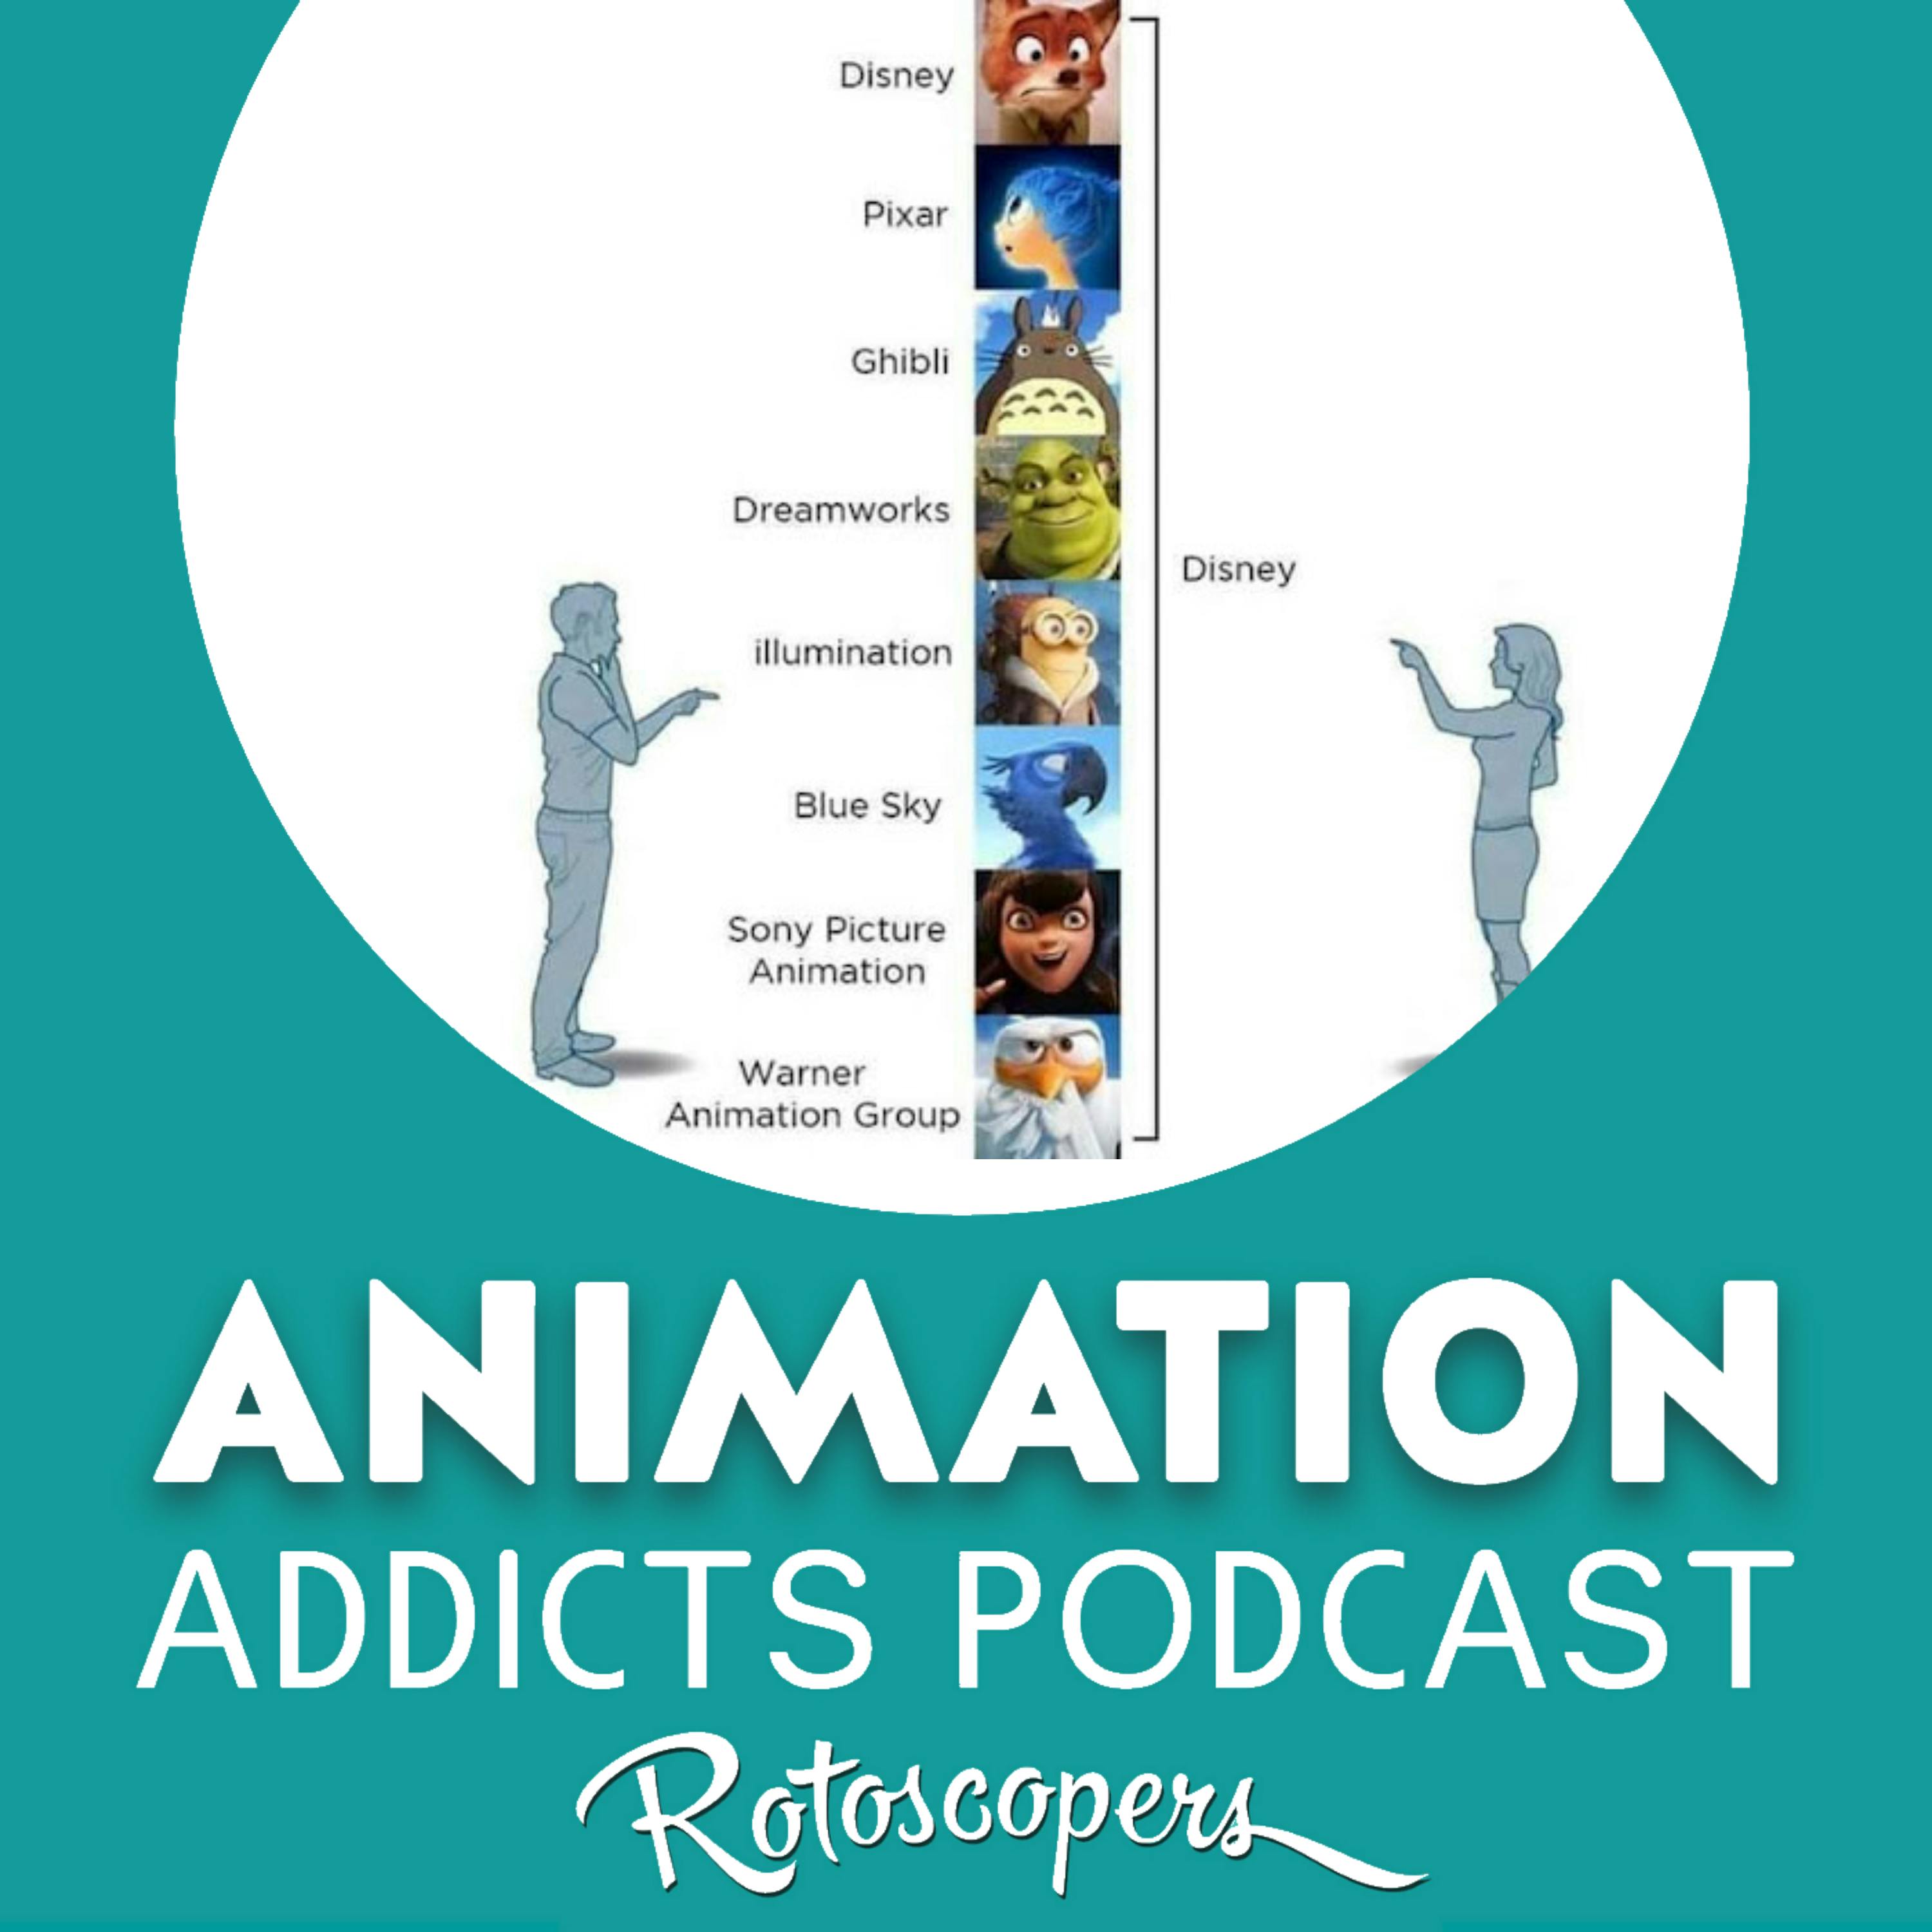 295 The Who’s Who In The Animation Industry - Does Disney Really Own Everything?